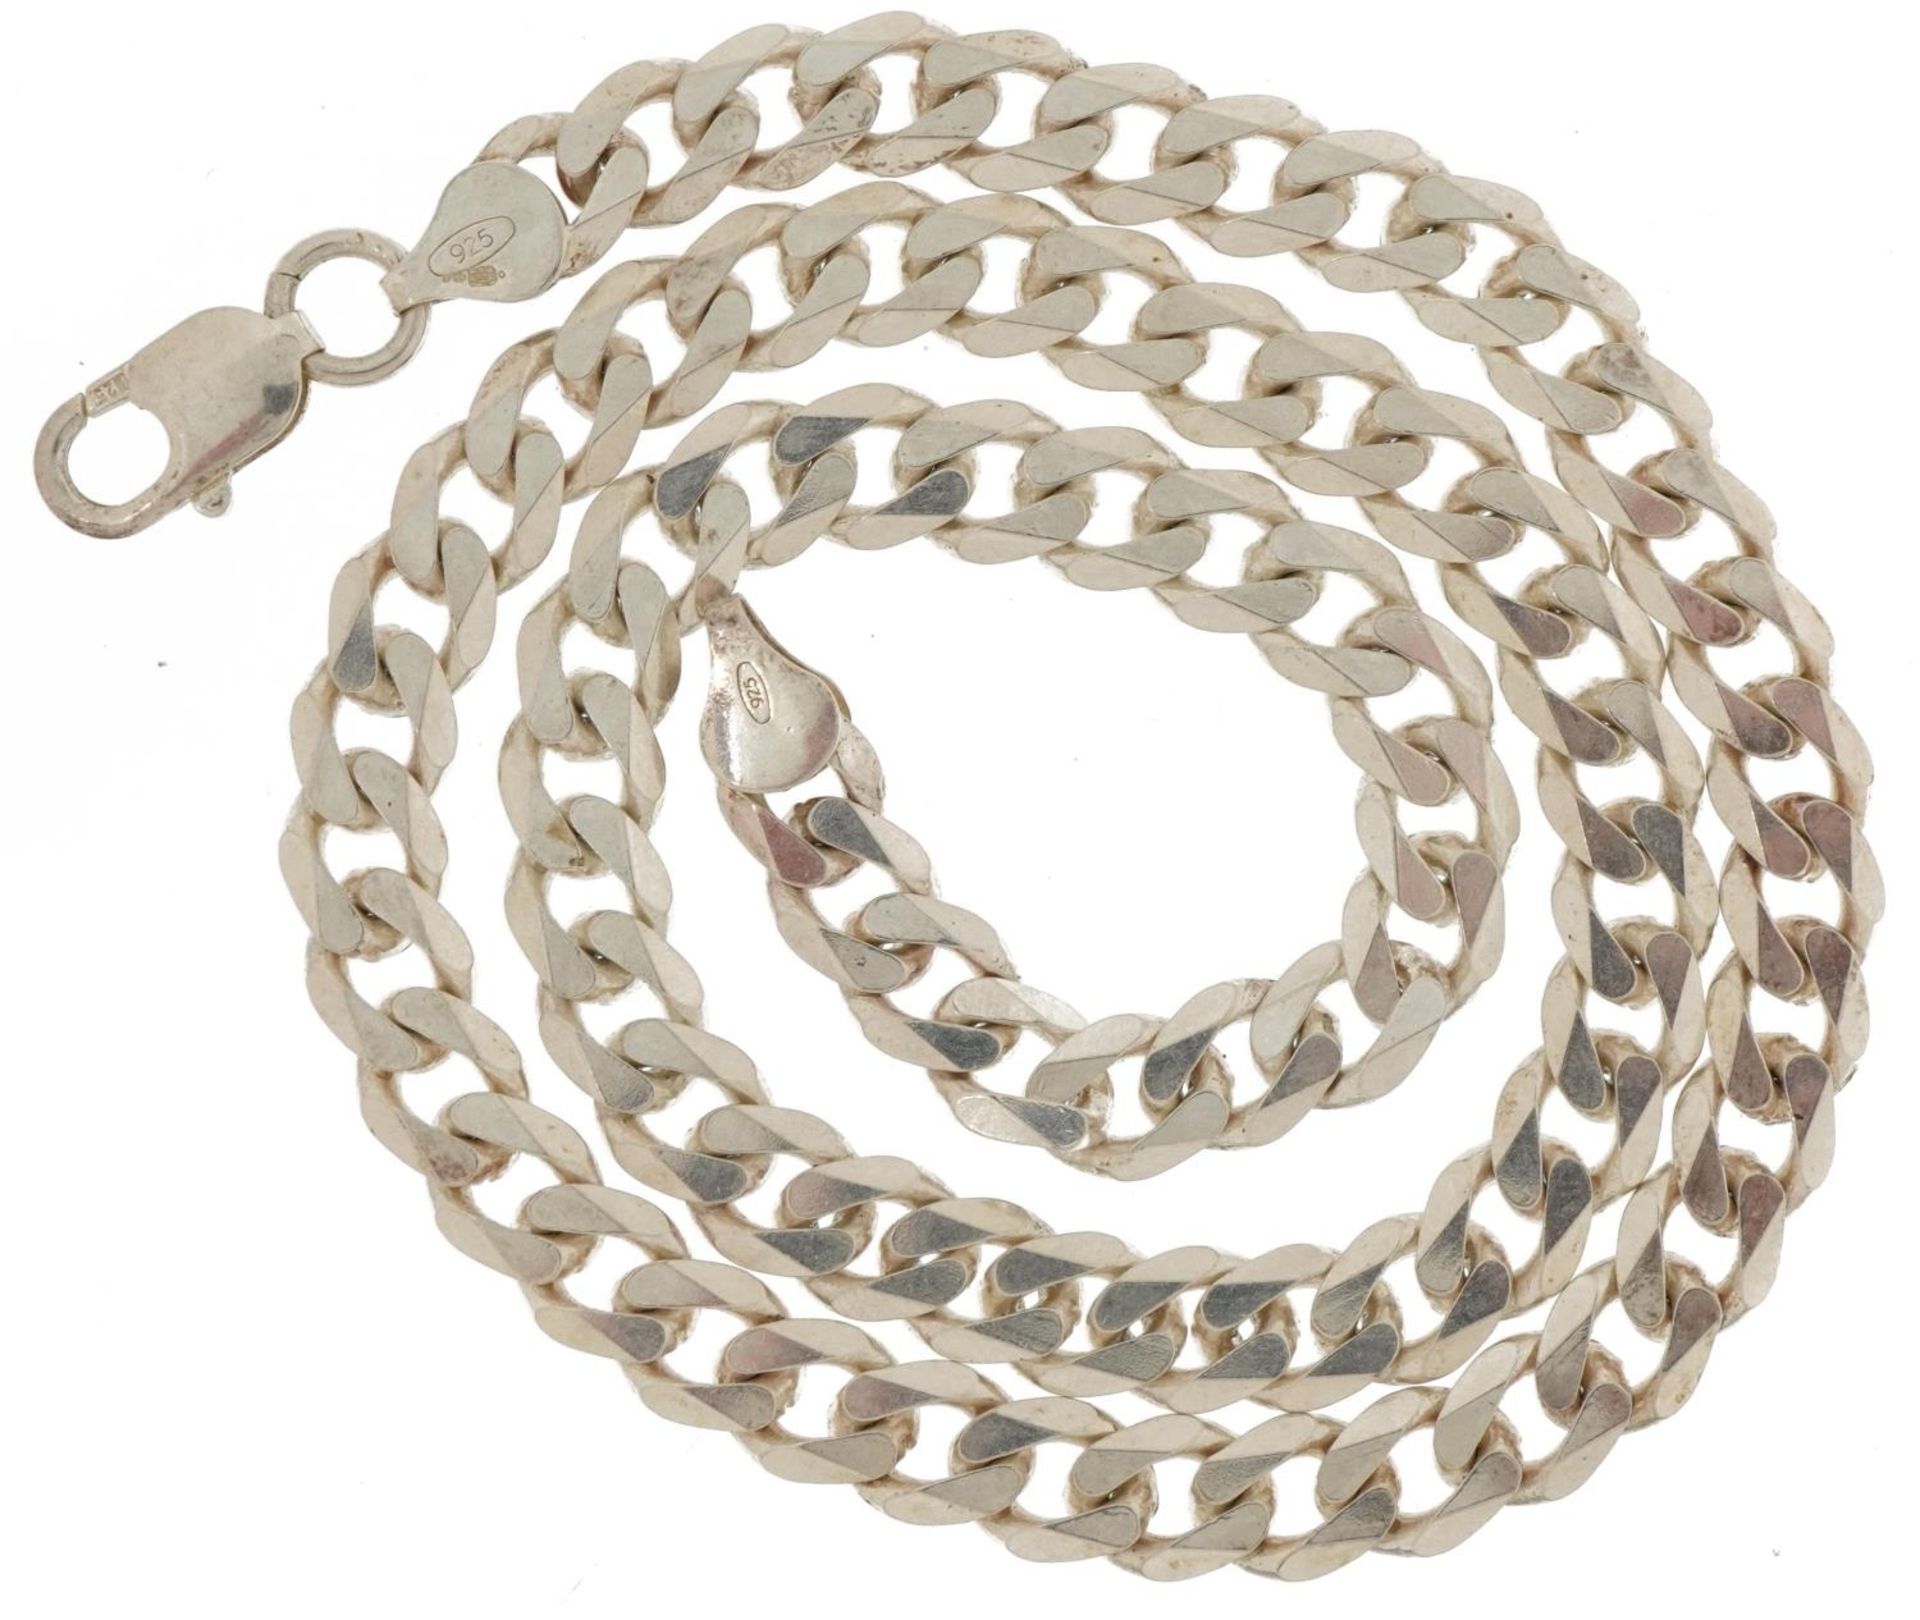 Silver curb link necklace, 50cm in length, 48.6g - Image 2 of 3